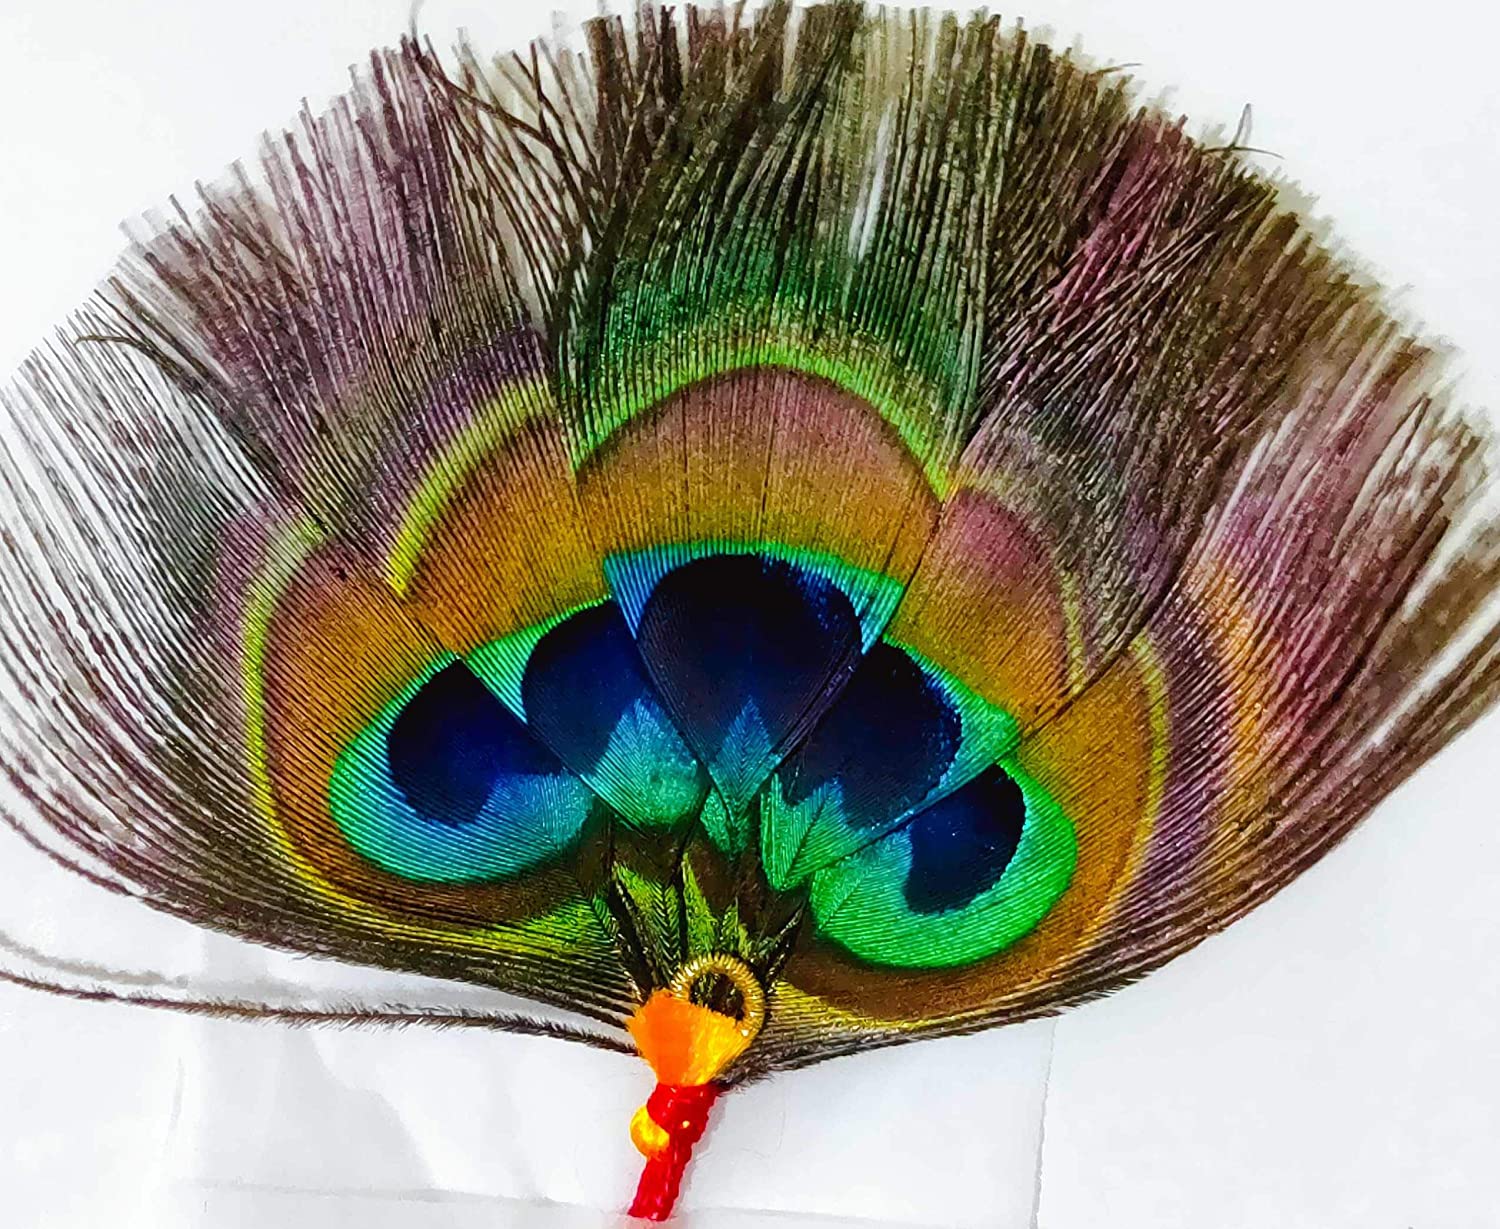 Small One Peace Beautiful Peacock Morpankh Feather For Hinduism Puja  Krishna | eBay